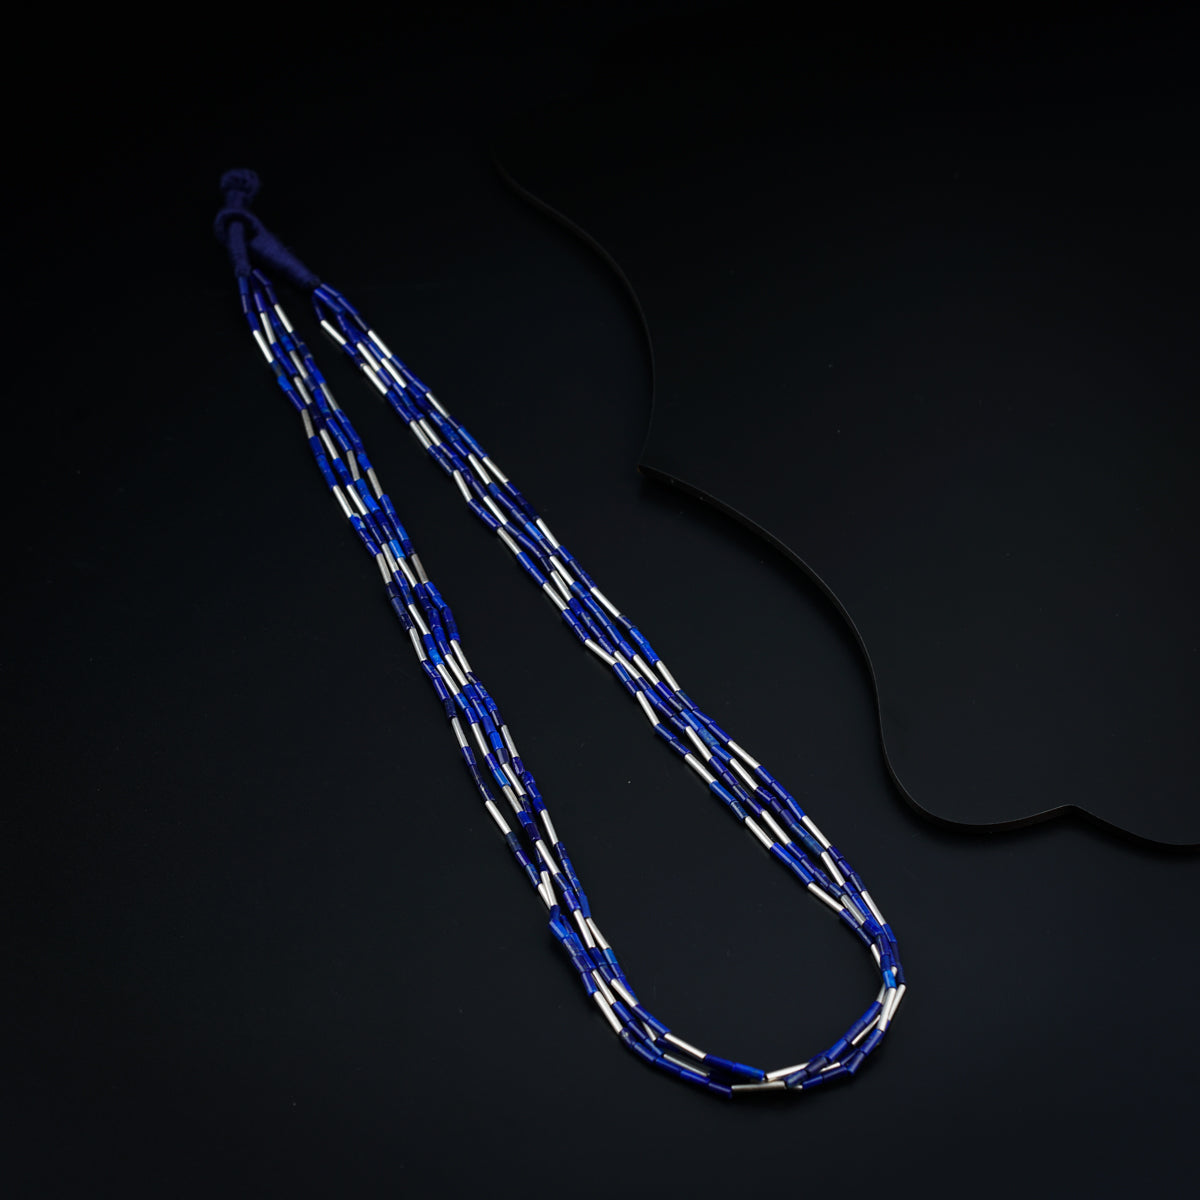 a blue and white lanyard on a black surface